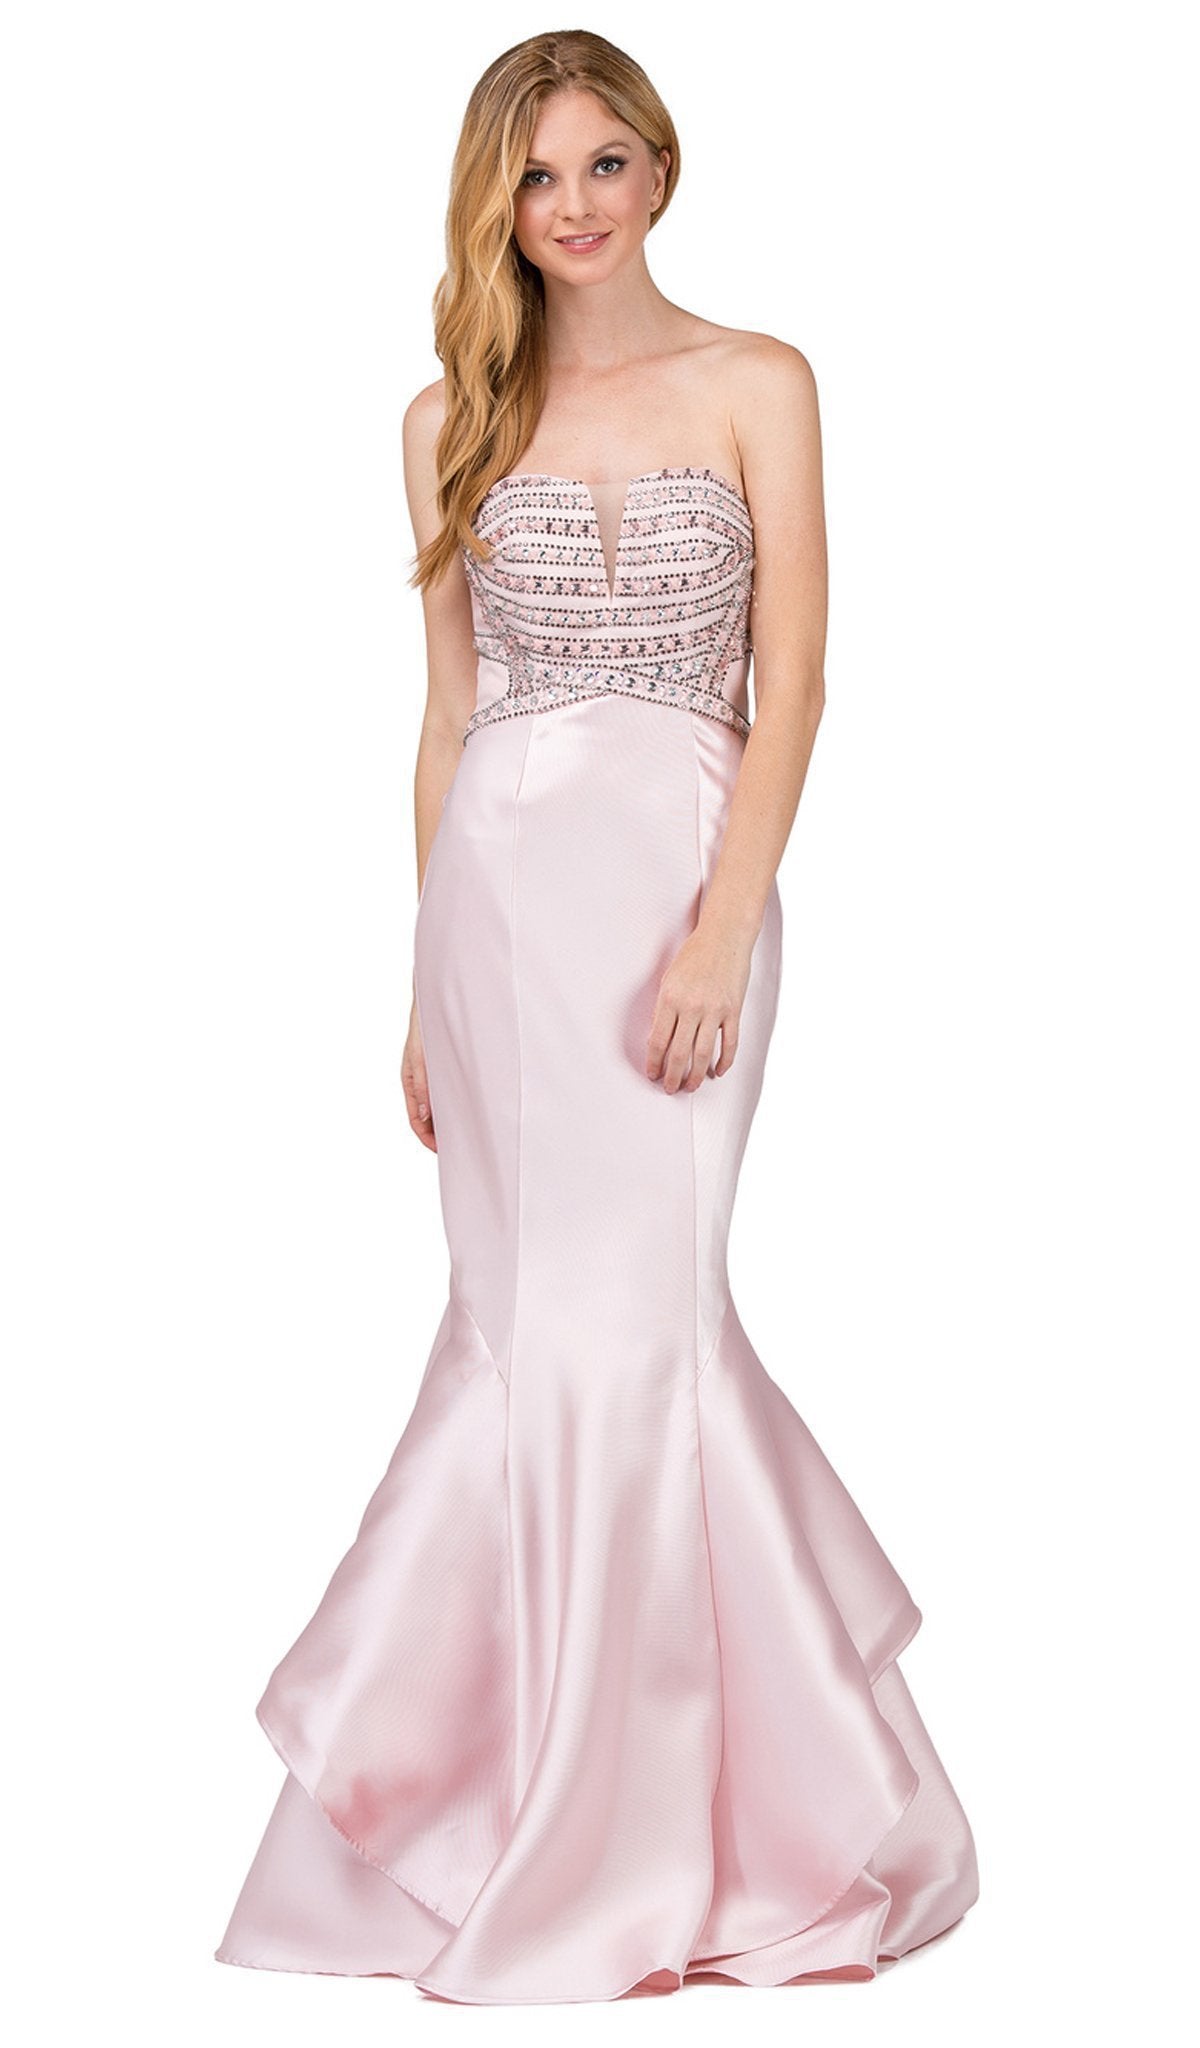 Dancing Queen - 9917 Beaded Sweetheart Mermaid Evening Dress Special Occasion Dress XS / Blush